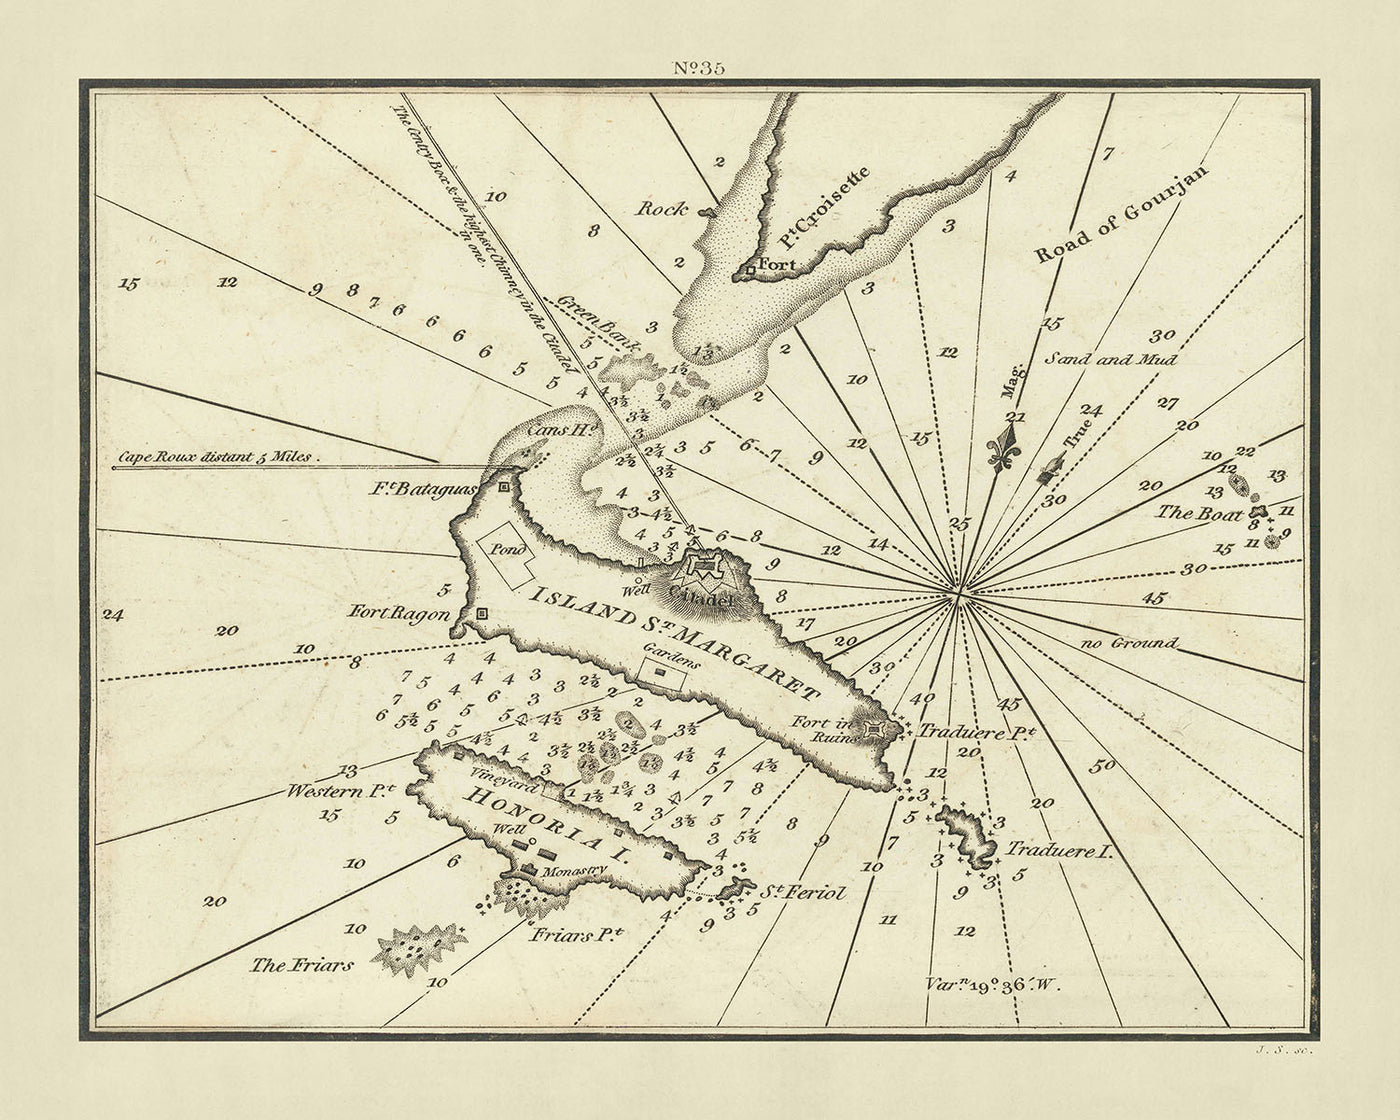 Old Lérins Islands and Bay of Cannes Nautical Chart by Heather, 1802: Forts, Monastery, Passages